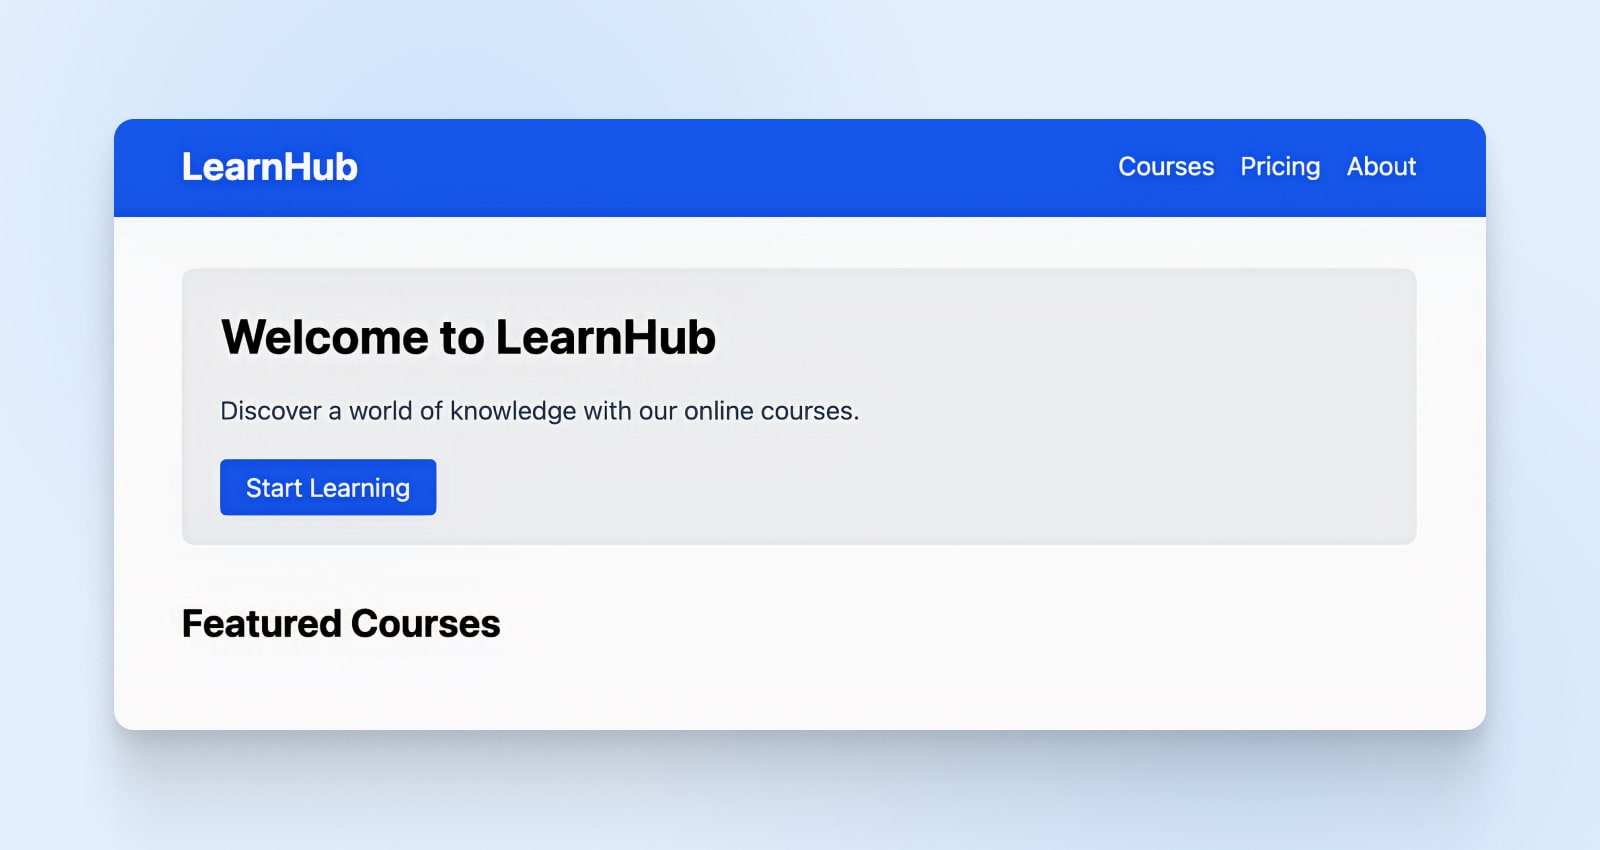 "Welcome to LearnHub" large, bold heading, a "Start Learning" blue button below, and "Featured Courses" in bold. 